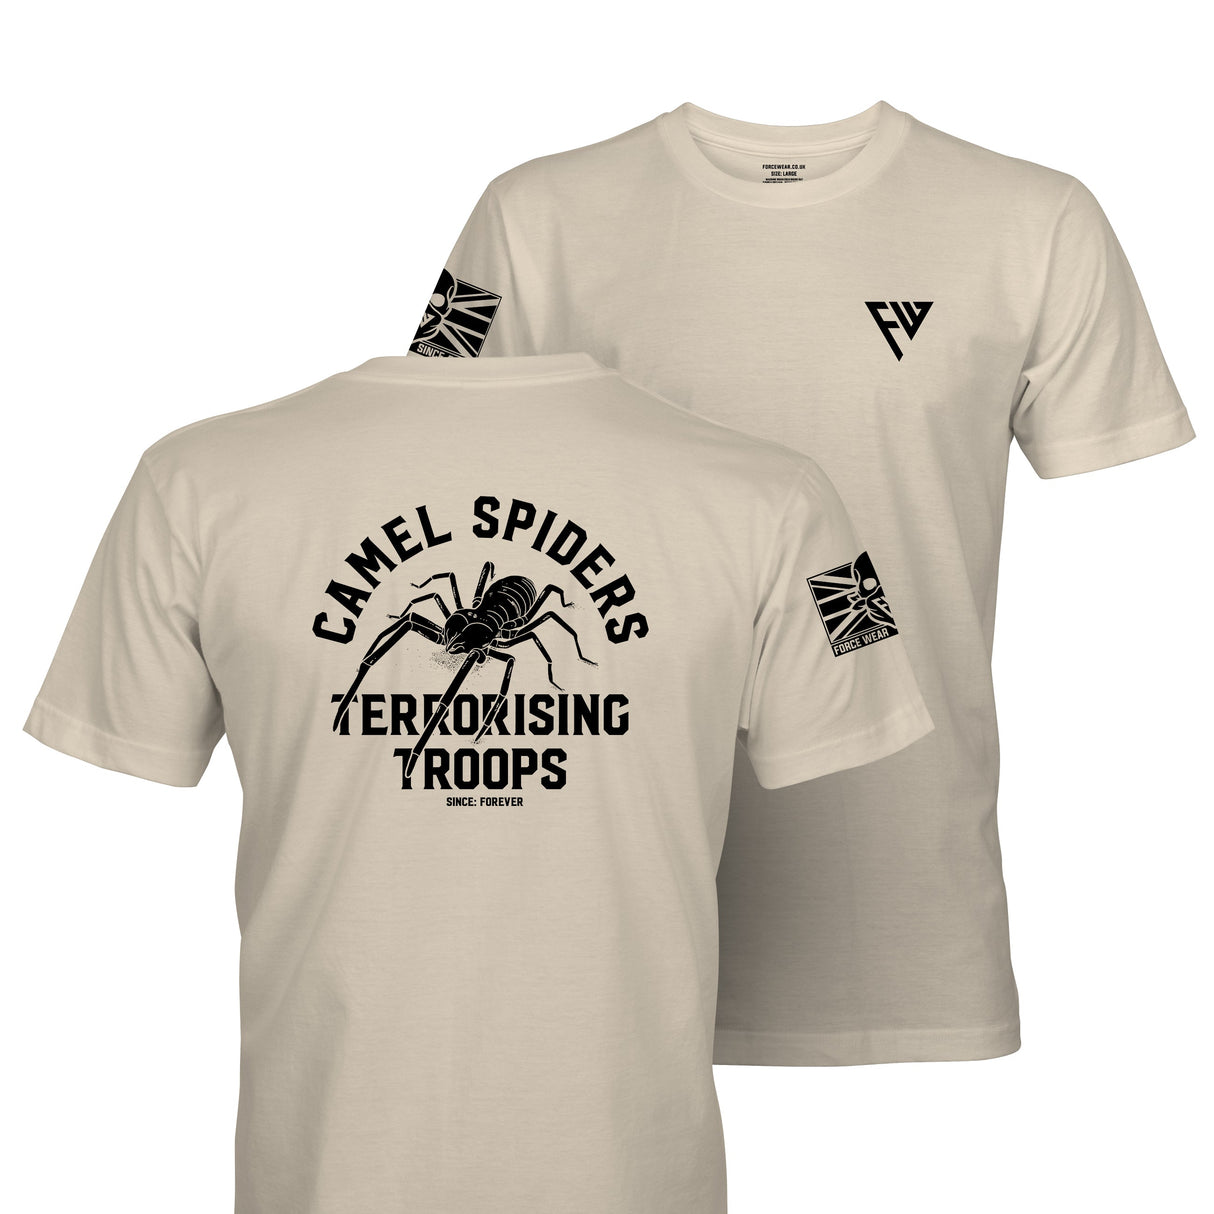 THE CAMEL SPIDER TAG & BACK - Force Wear HQ - T-SHIRTS